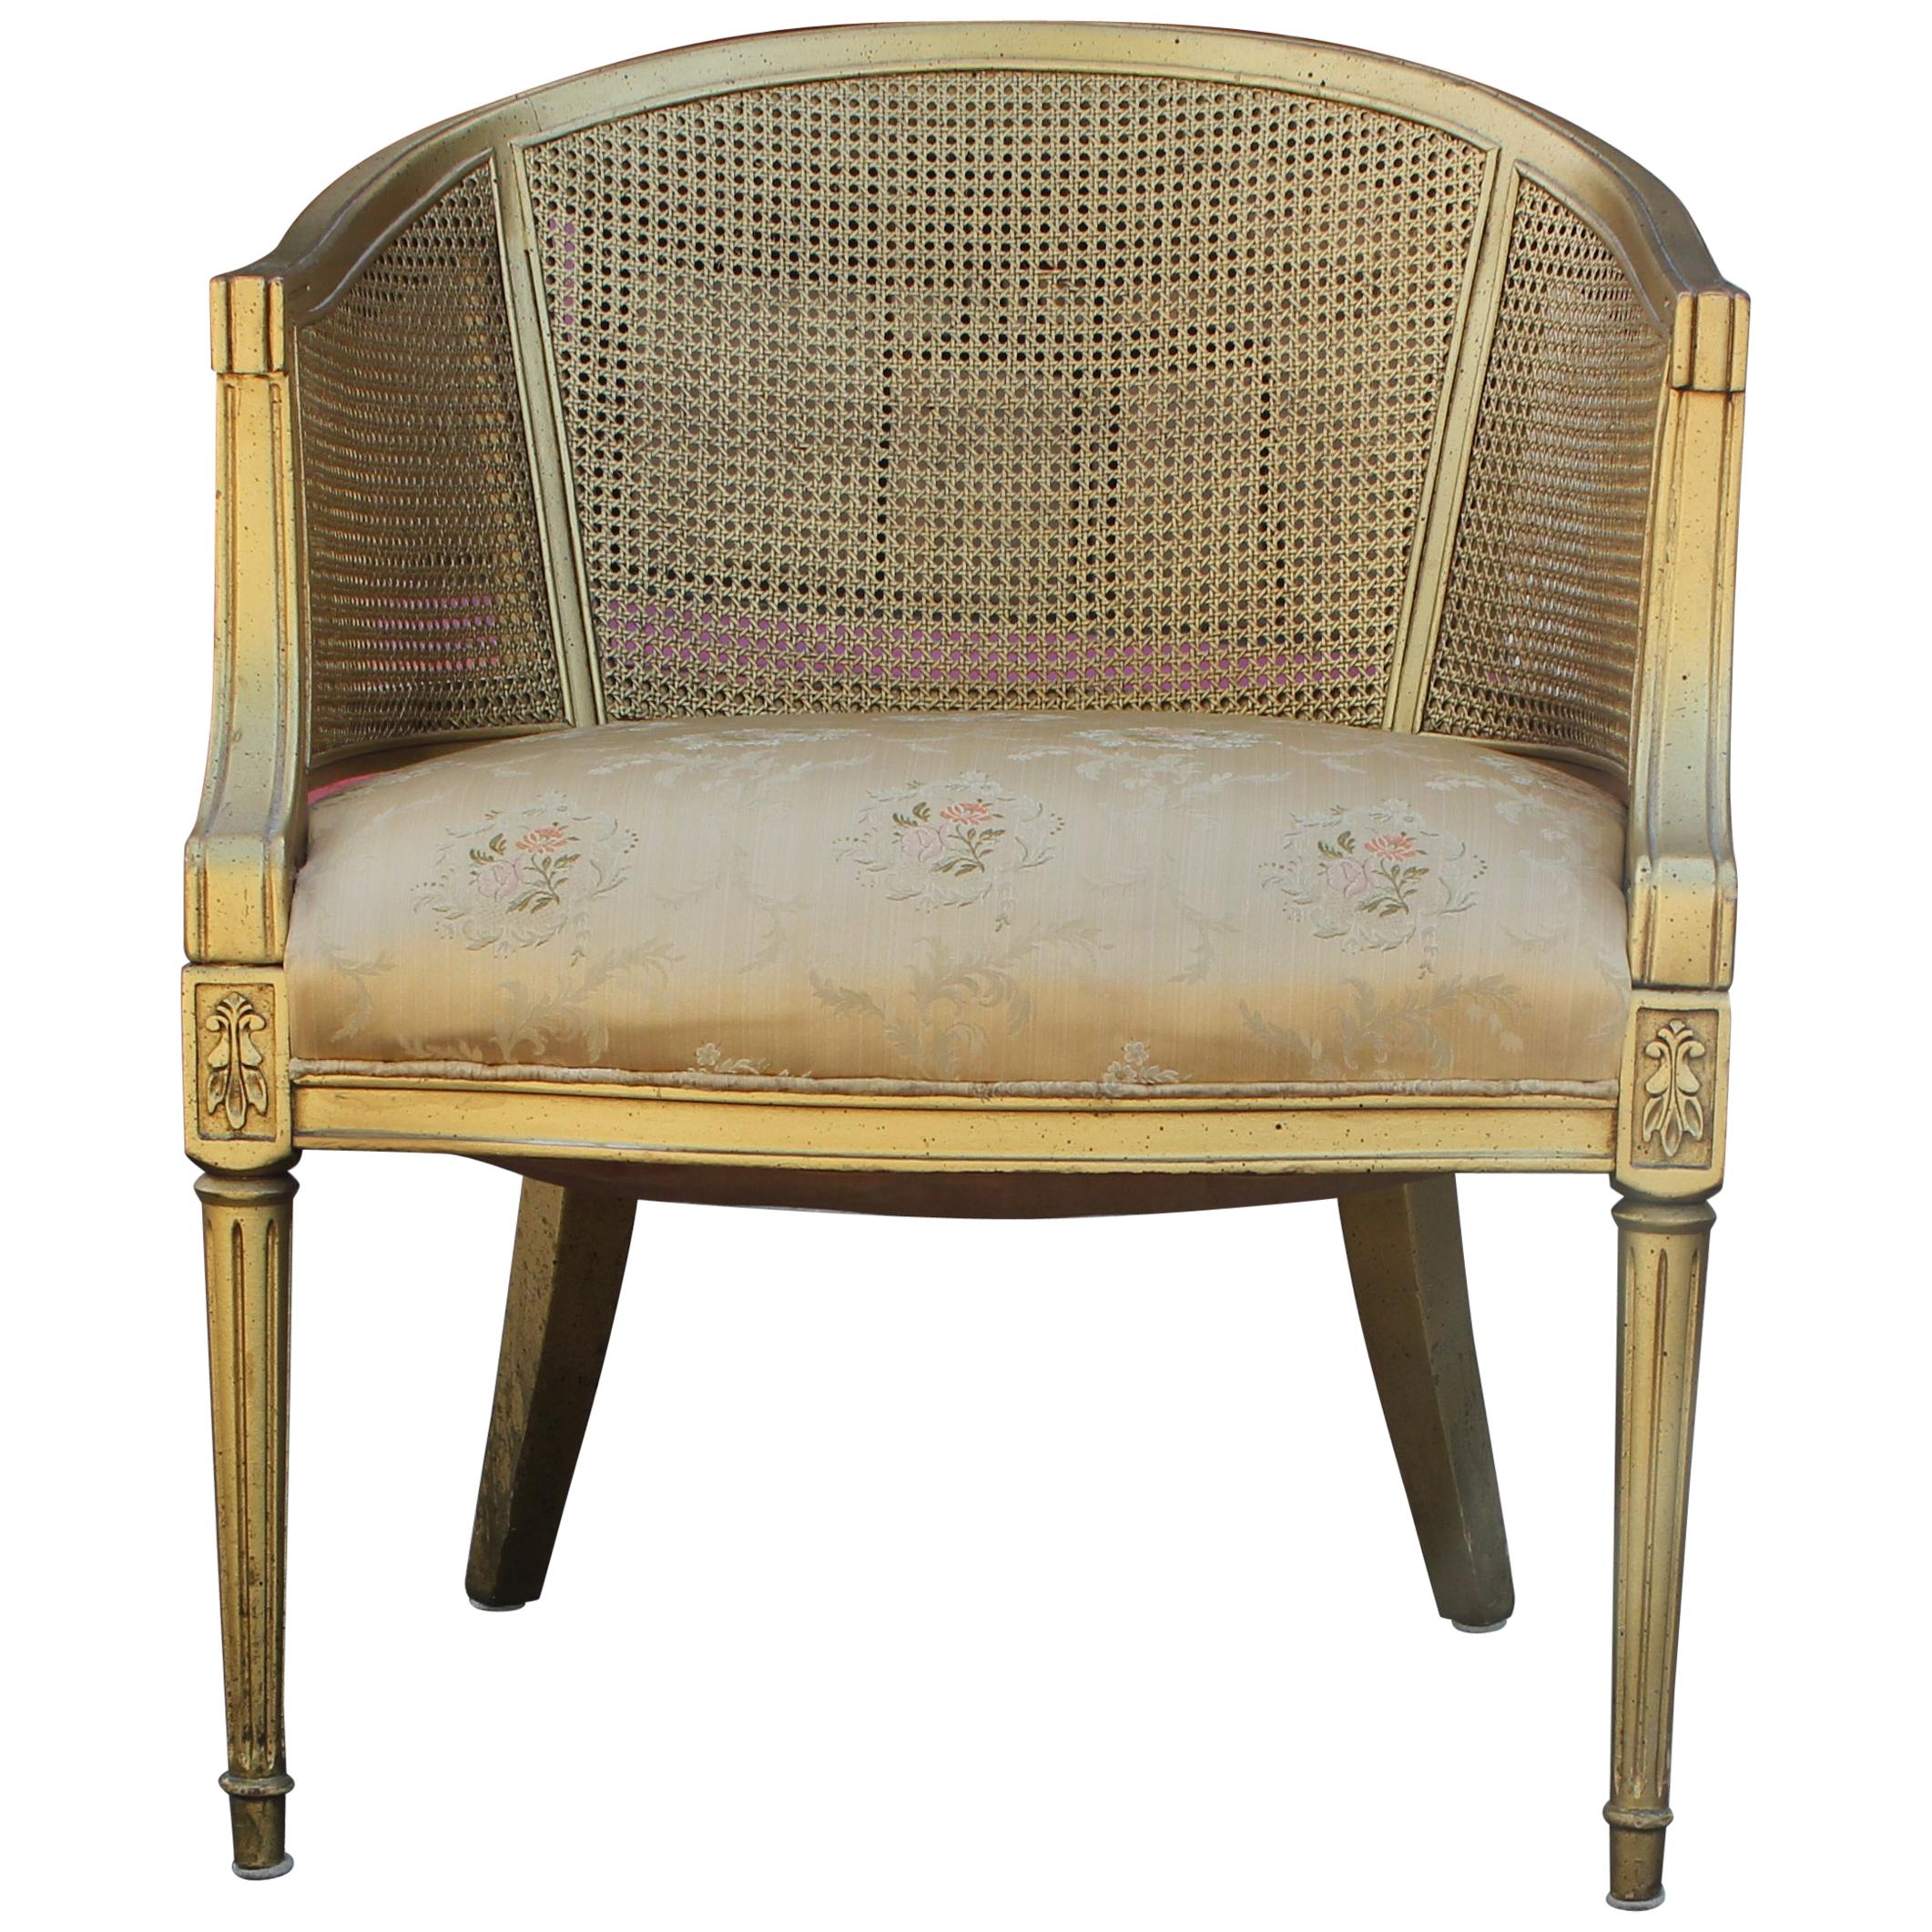 Pair of Hollywood Regency barrel back lounge chairs with gold cane and a gold wood frame.